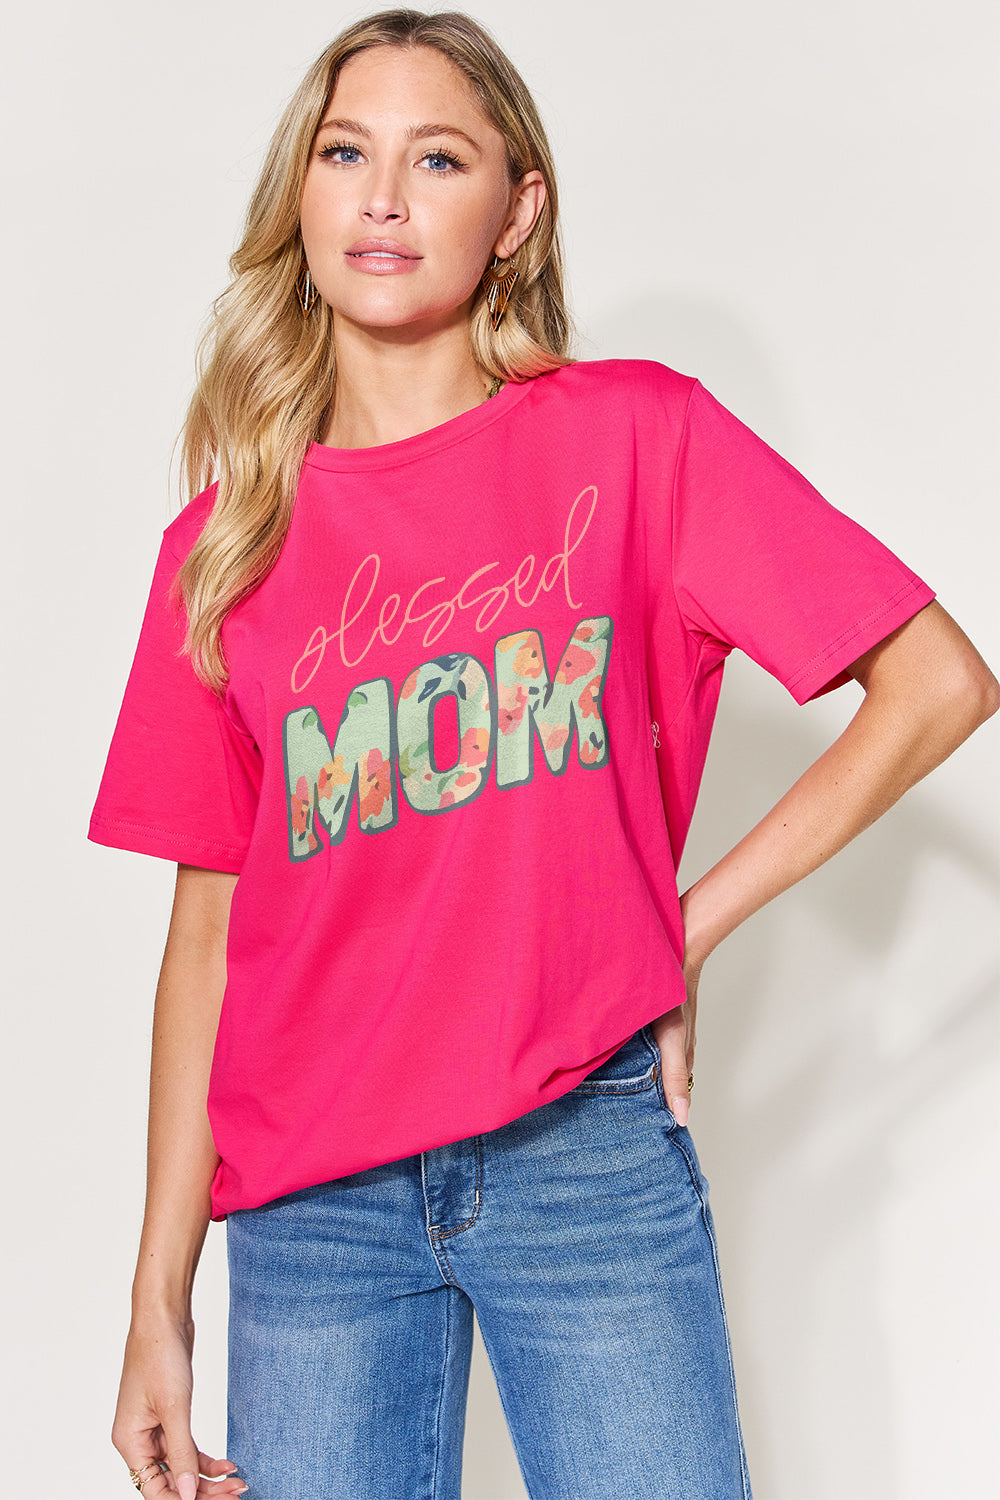 Simply Love Full Size Blessed Mom Floral Graphic Round Neck Short Sleeve T-Shirt